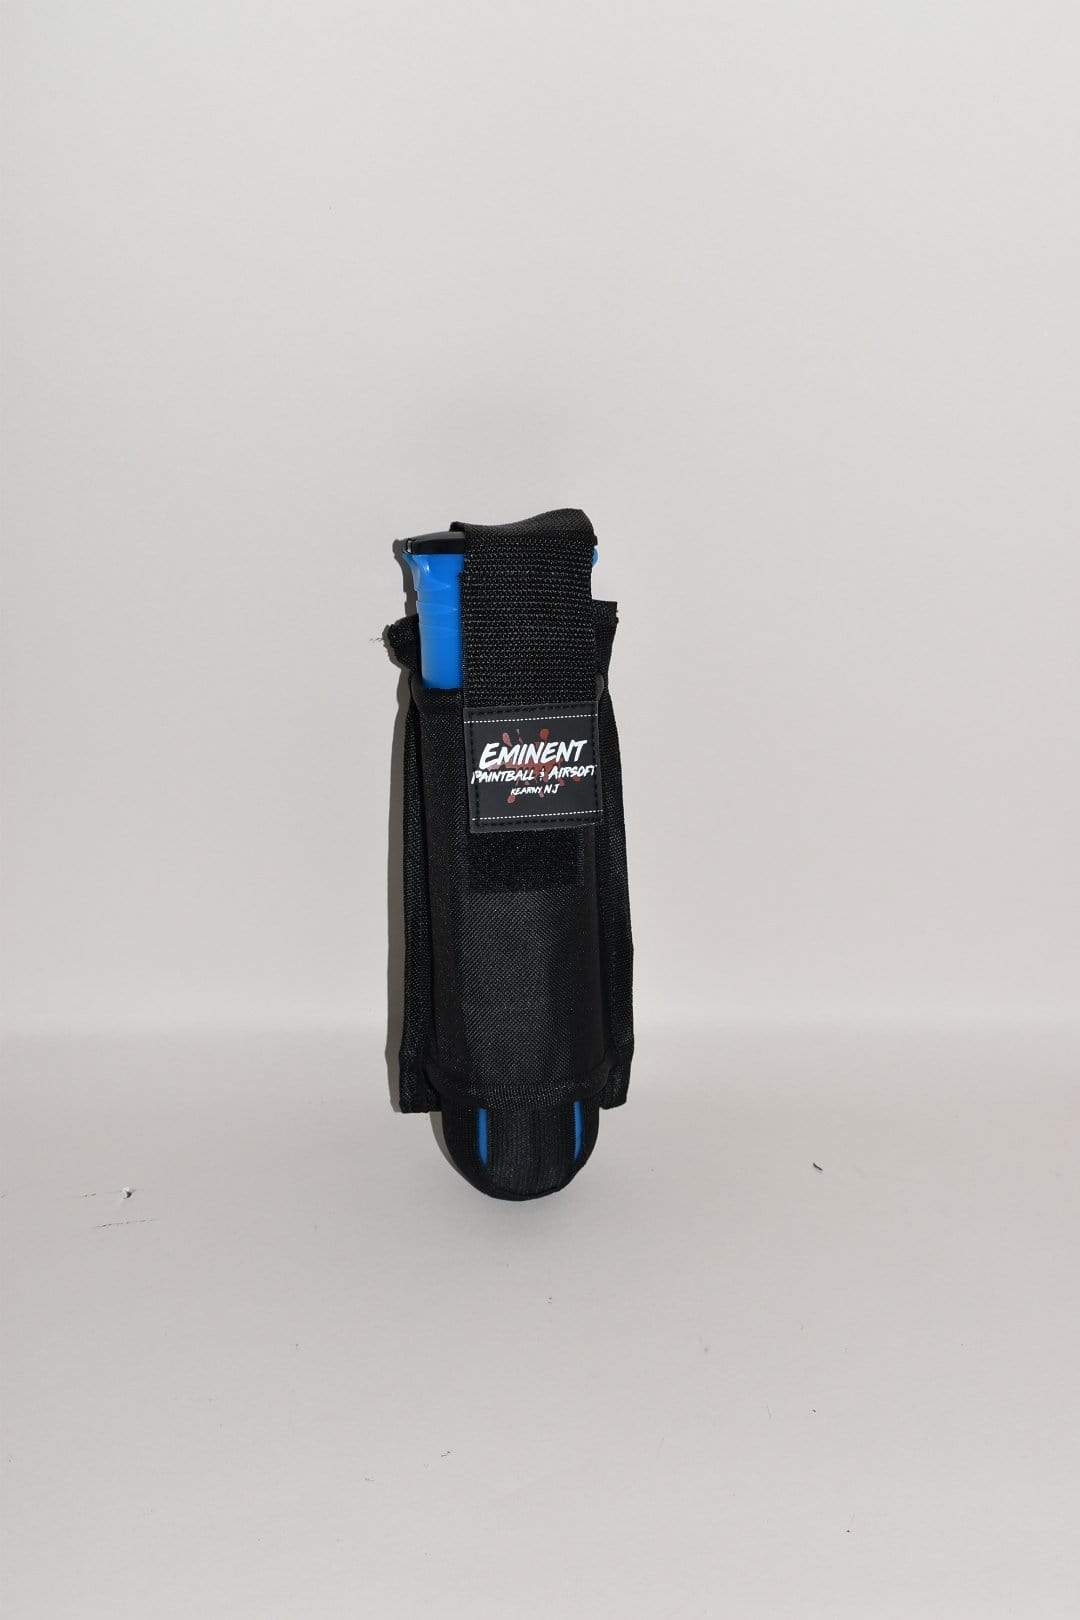 Eminent Paintball Molle Vest 1 Pod Pouch - Black - Eminent Paintball And Airsoft